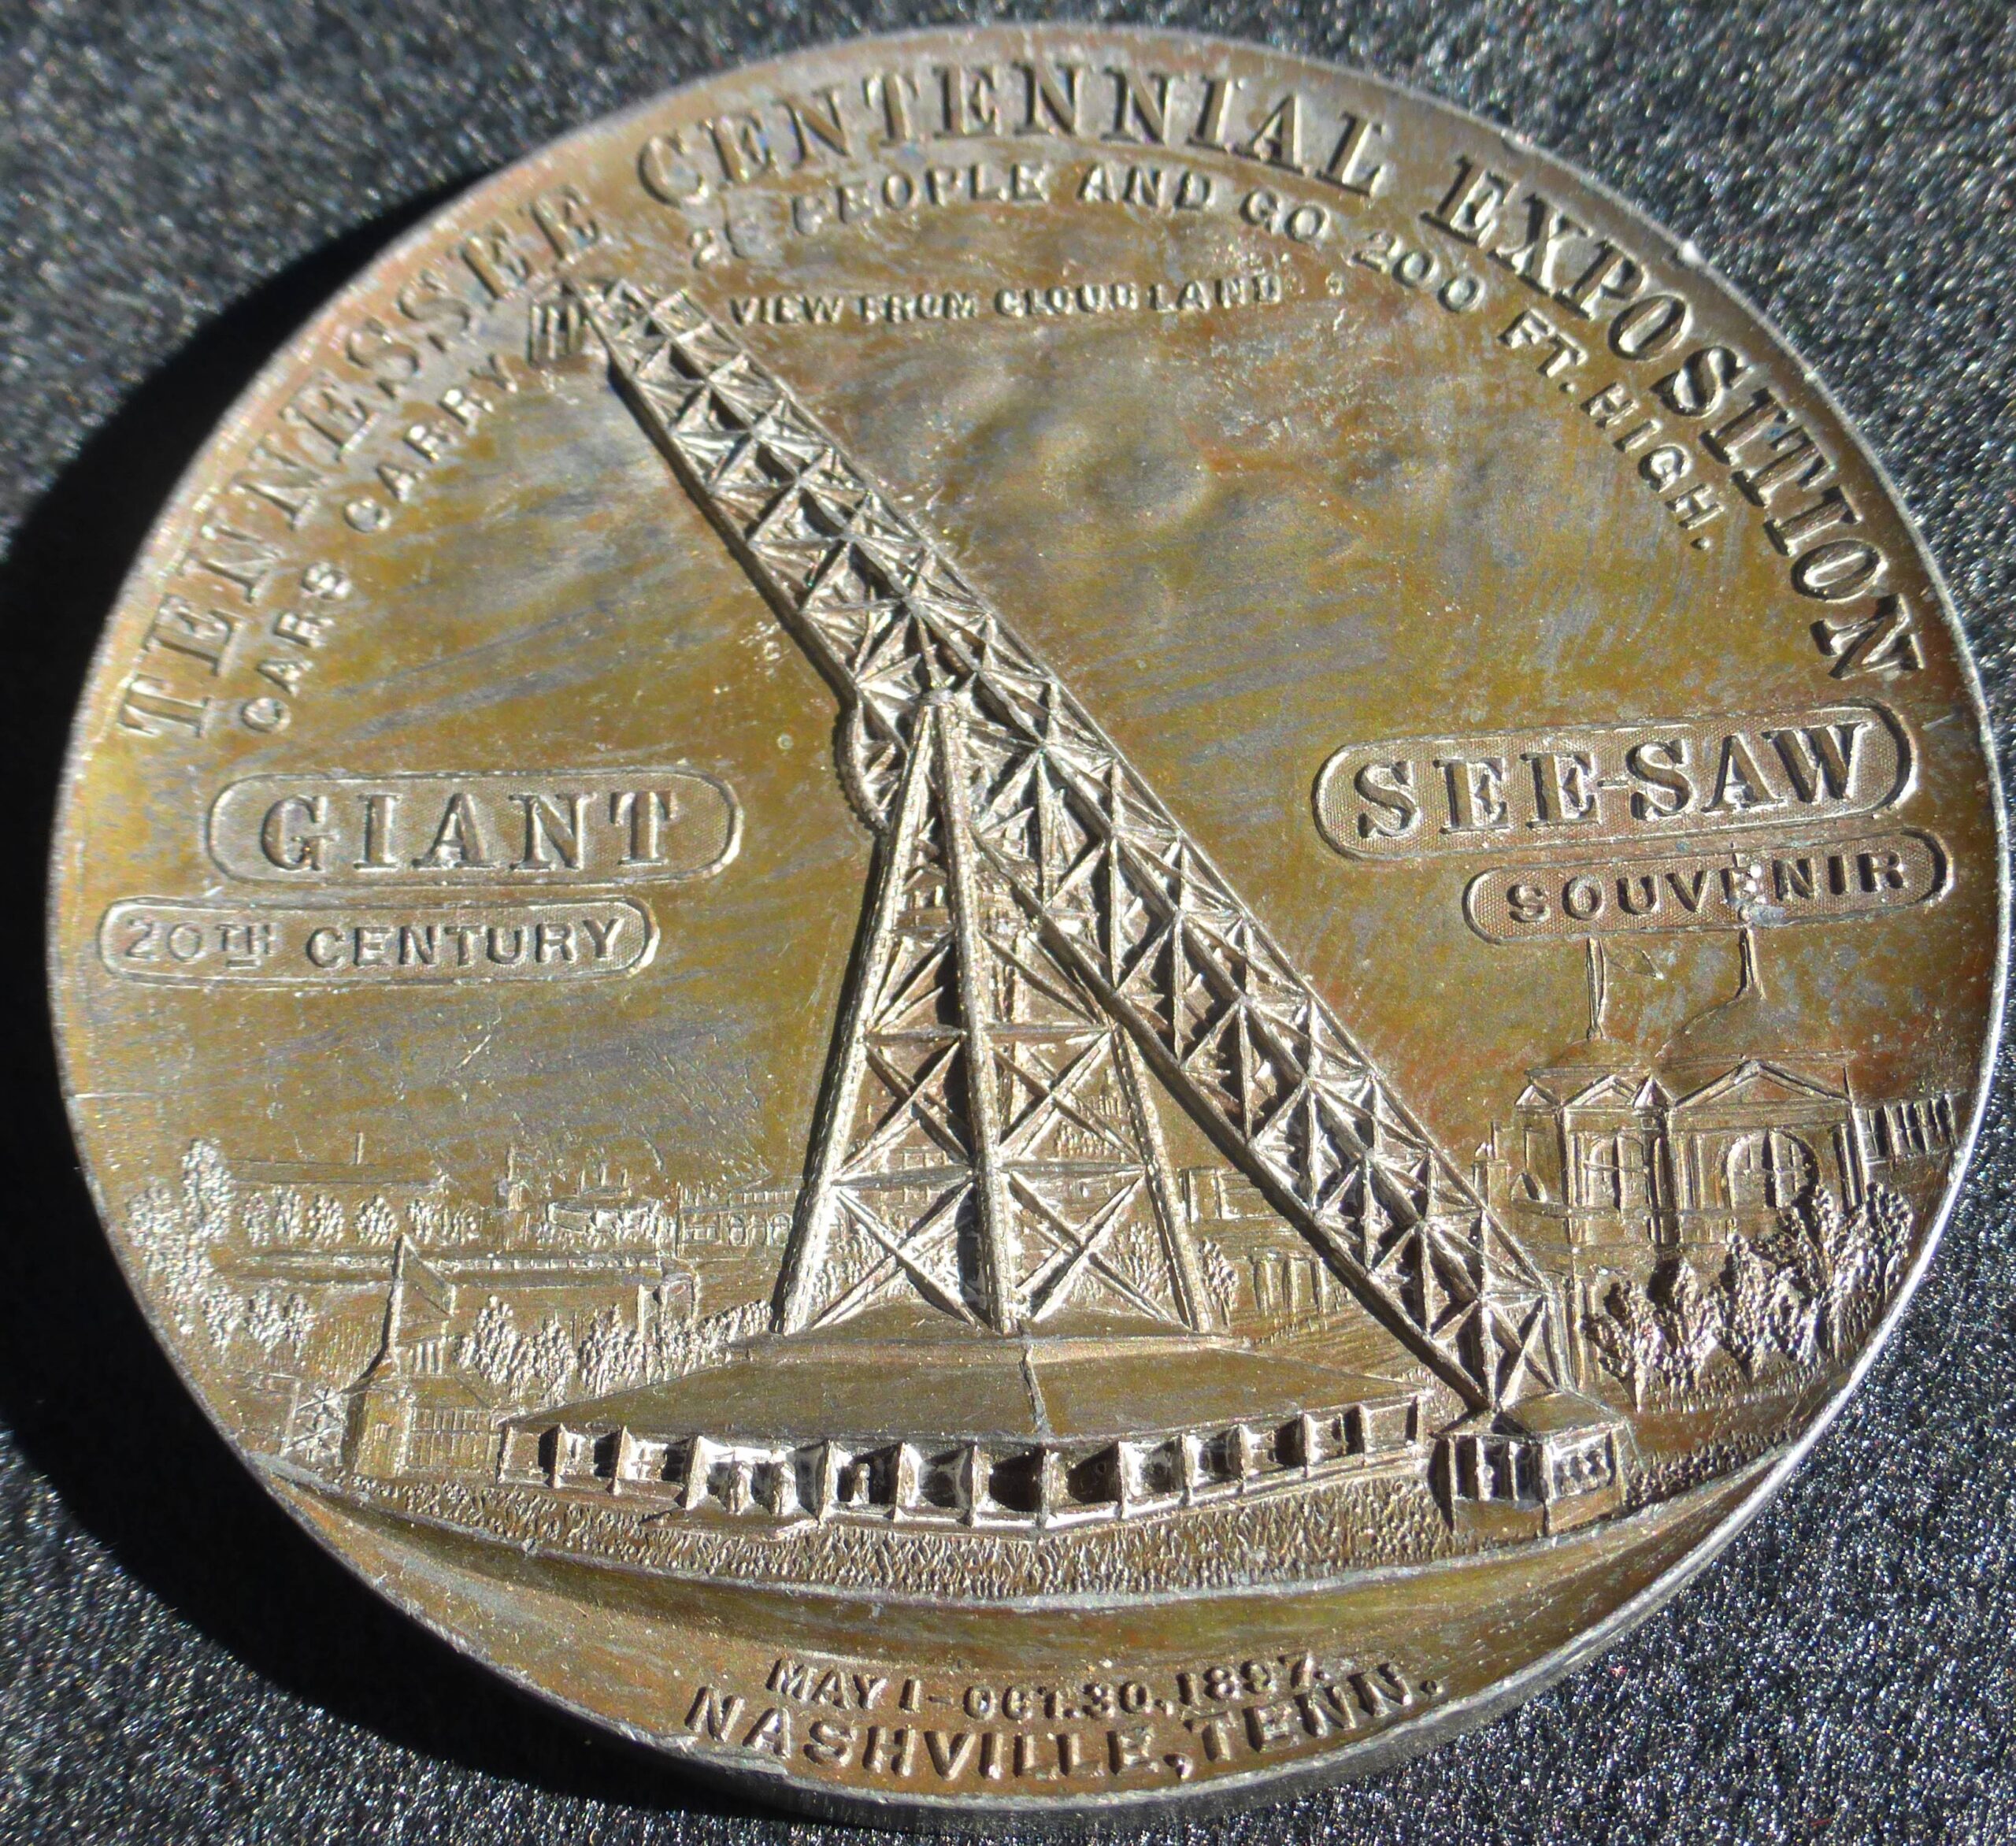 Giant Seesaw Medal of the 1897 Tennessee Centennial Exposition